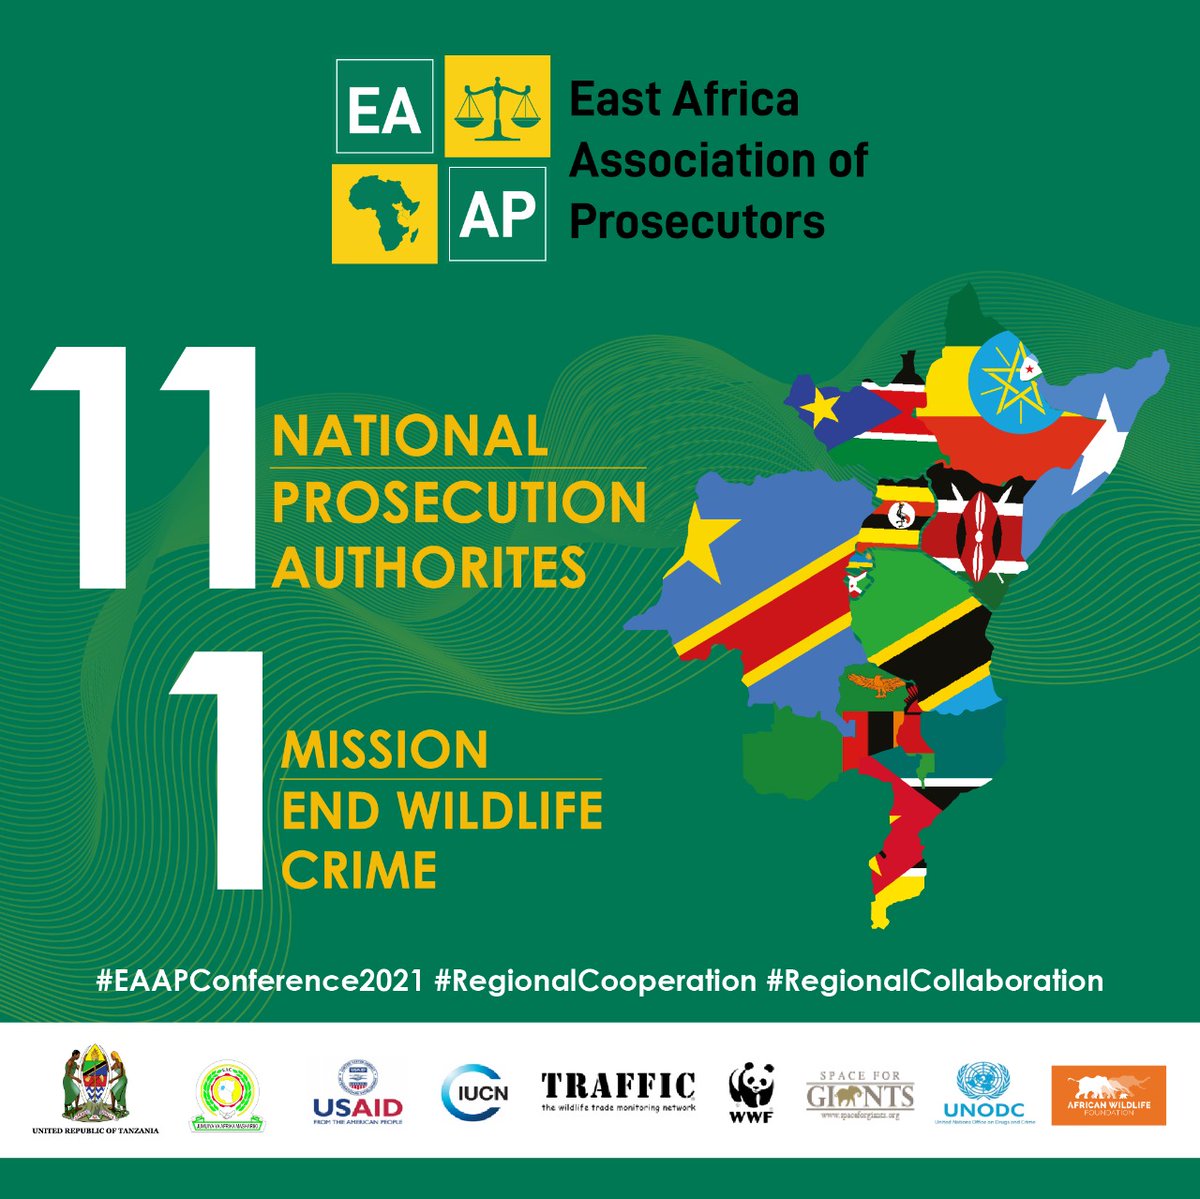 The #EAAPConference2021 is underway in Arusha, Tanzania. Among those who gave opening remarks are Deputy Secretary General of the EAC, DPP Tanzania, and DPP Kenya. #RegionalCooperation #RegionalCollaboration